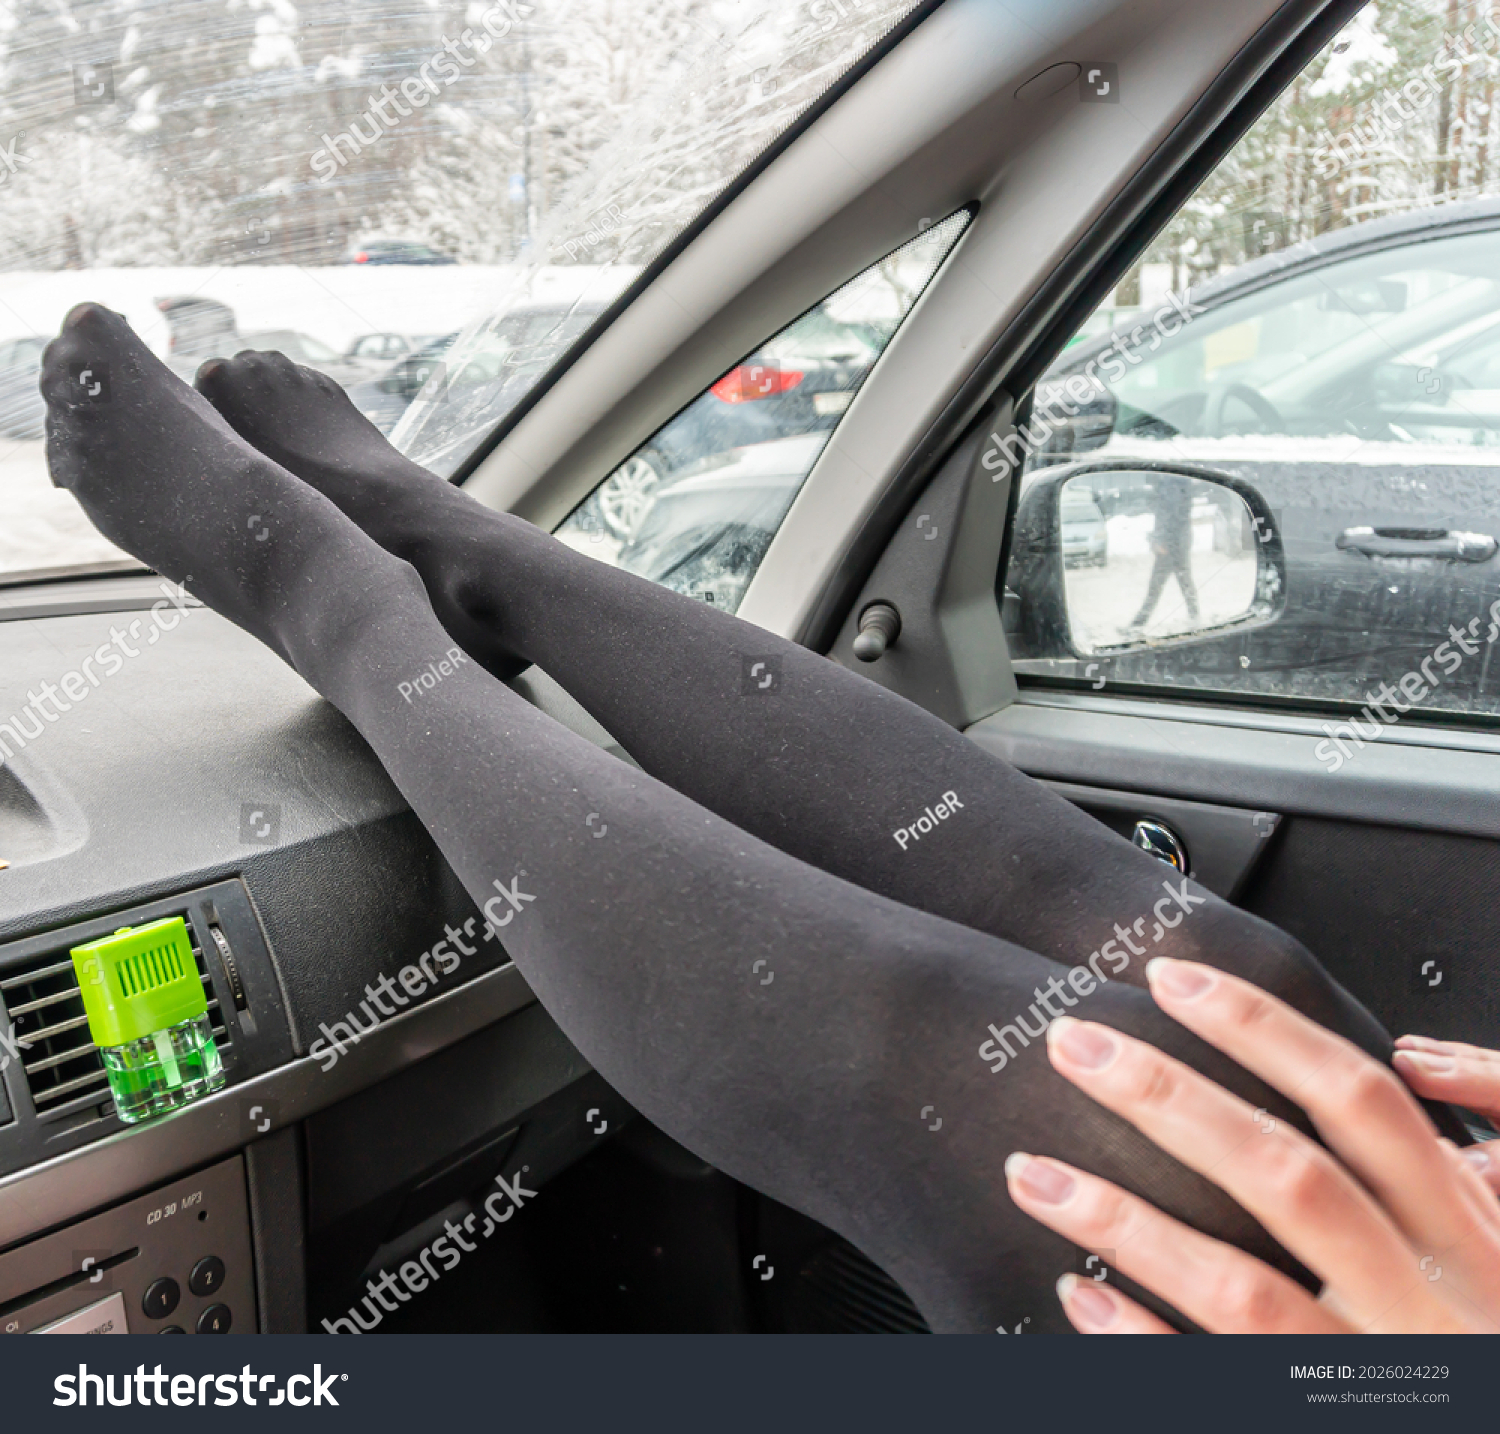 bradley regan recommends pantyhose in the car pic